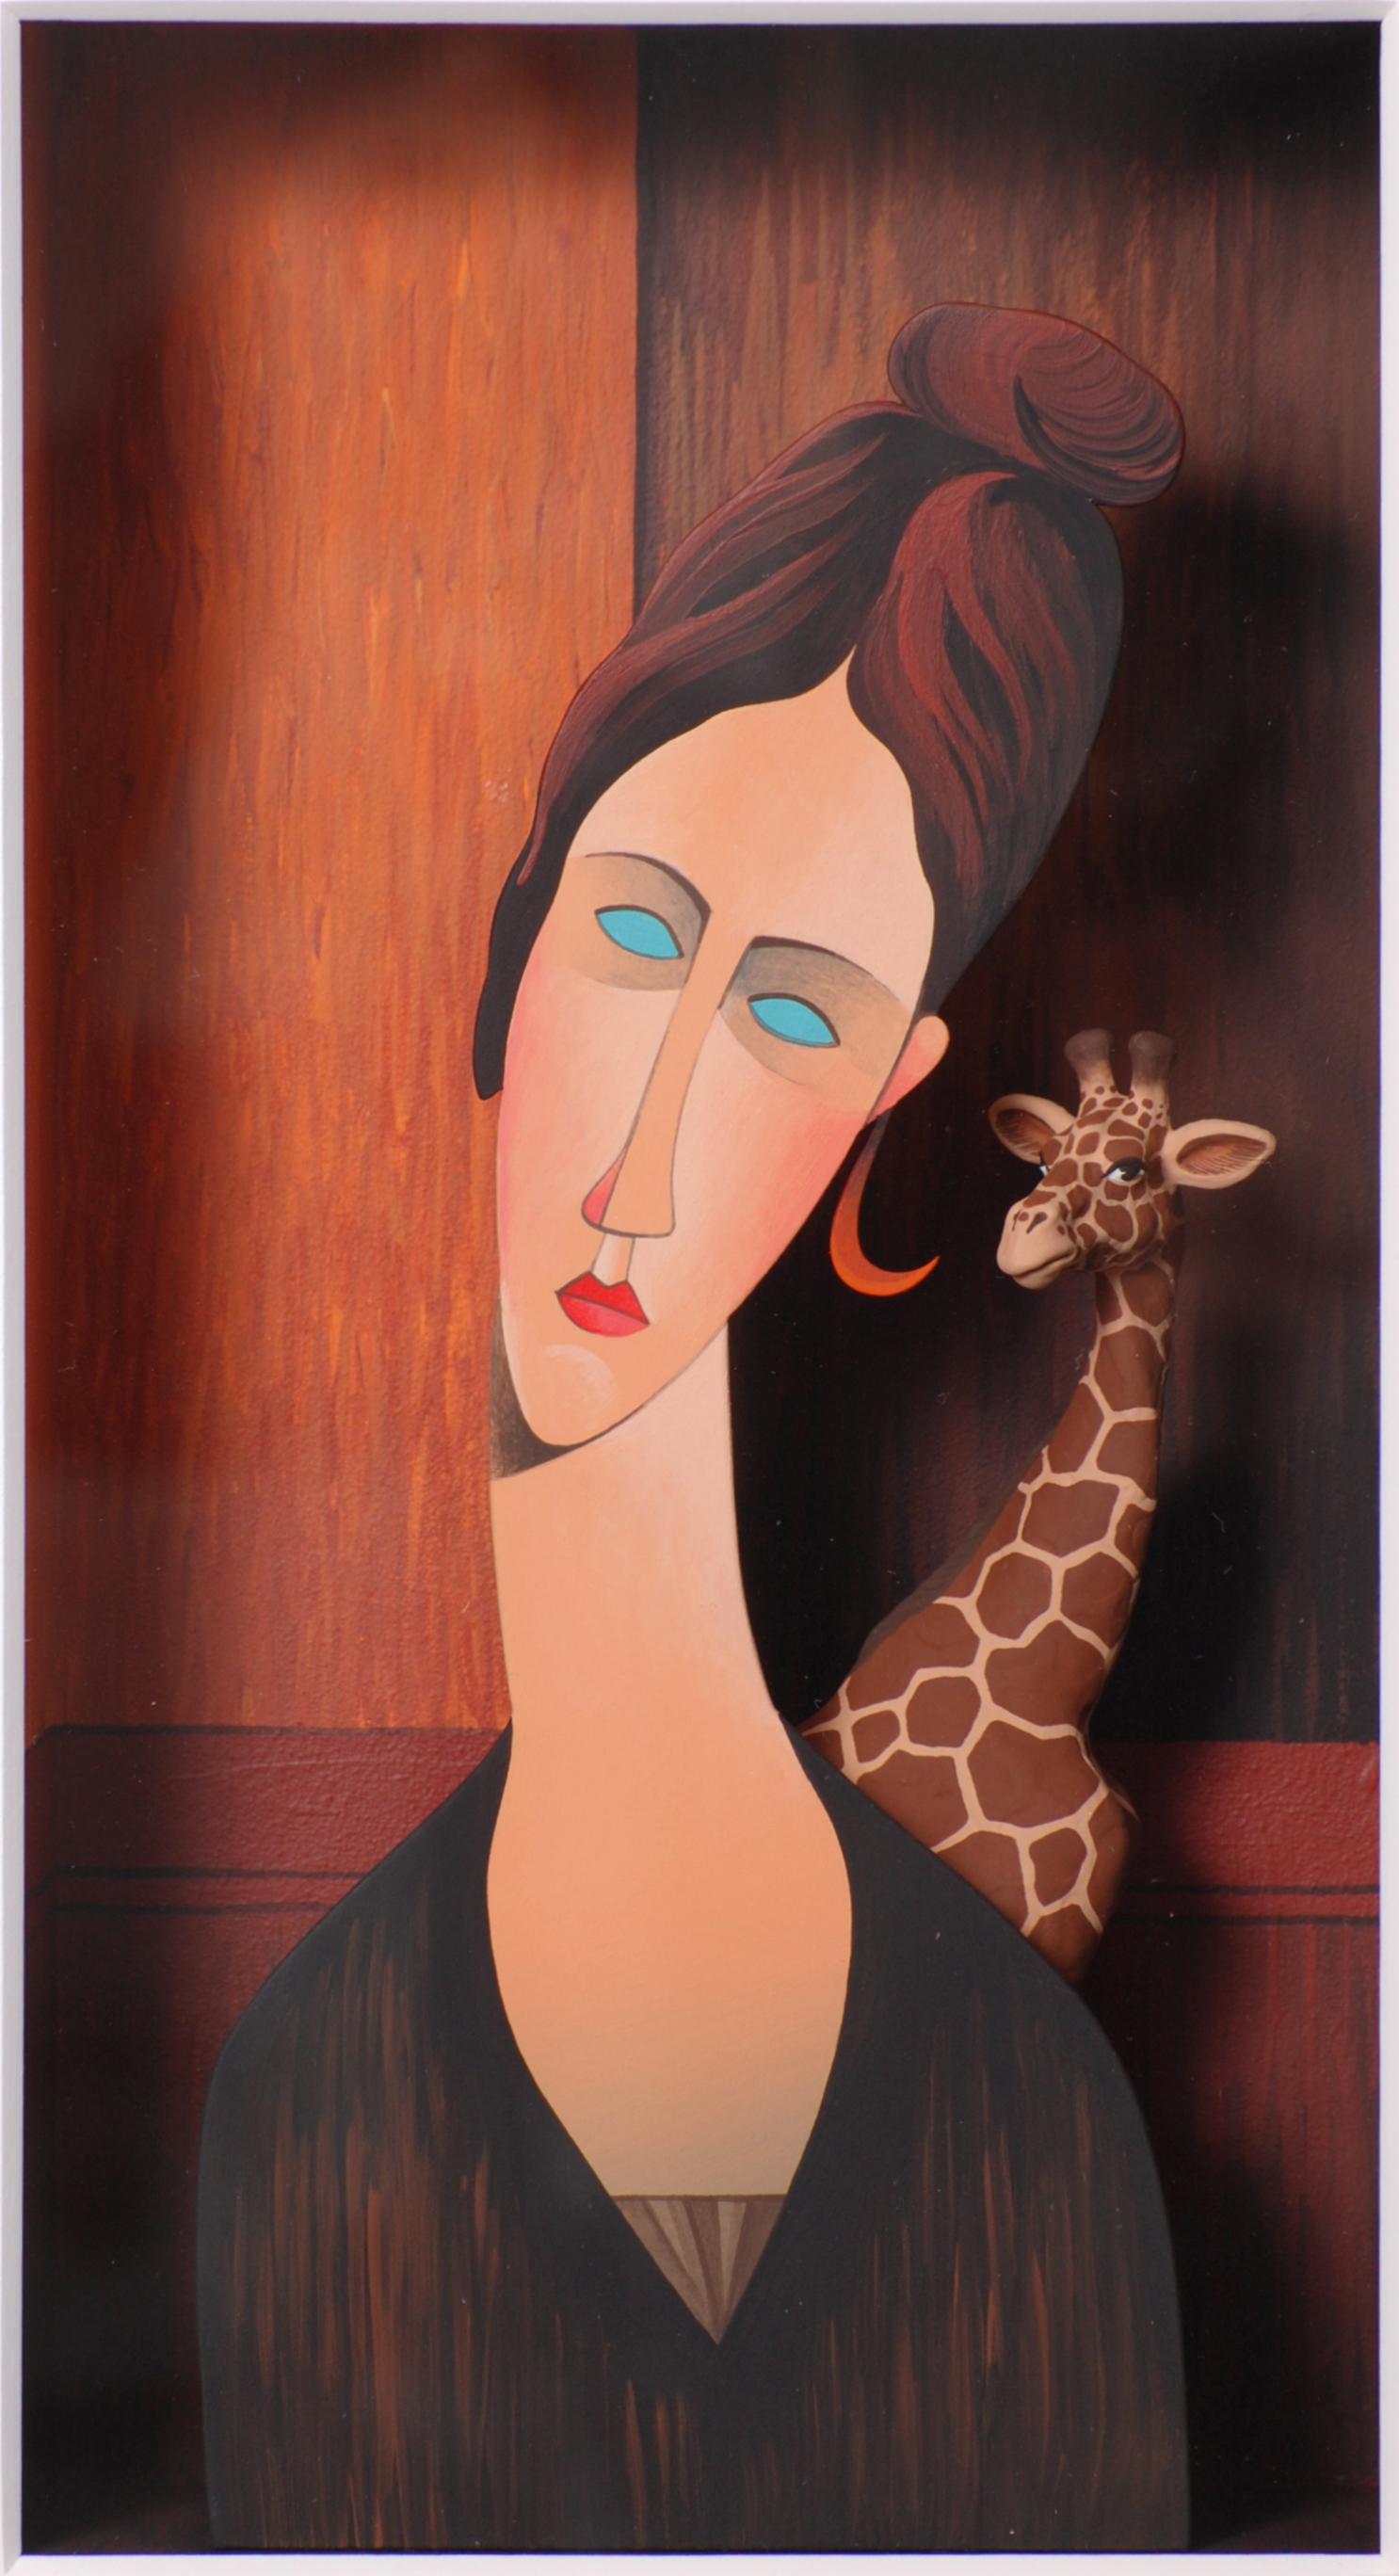 Homage to Modigliani -contemporary art work, design tribute to Amedeo Modigliani - Mixed Media Art by Volker Kuhn